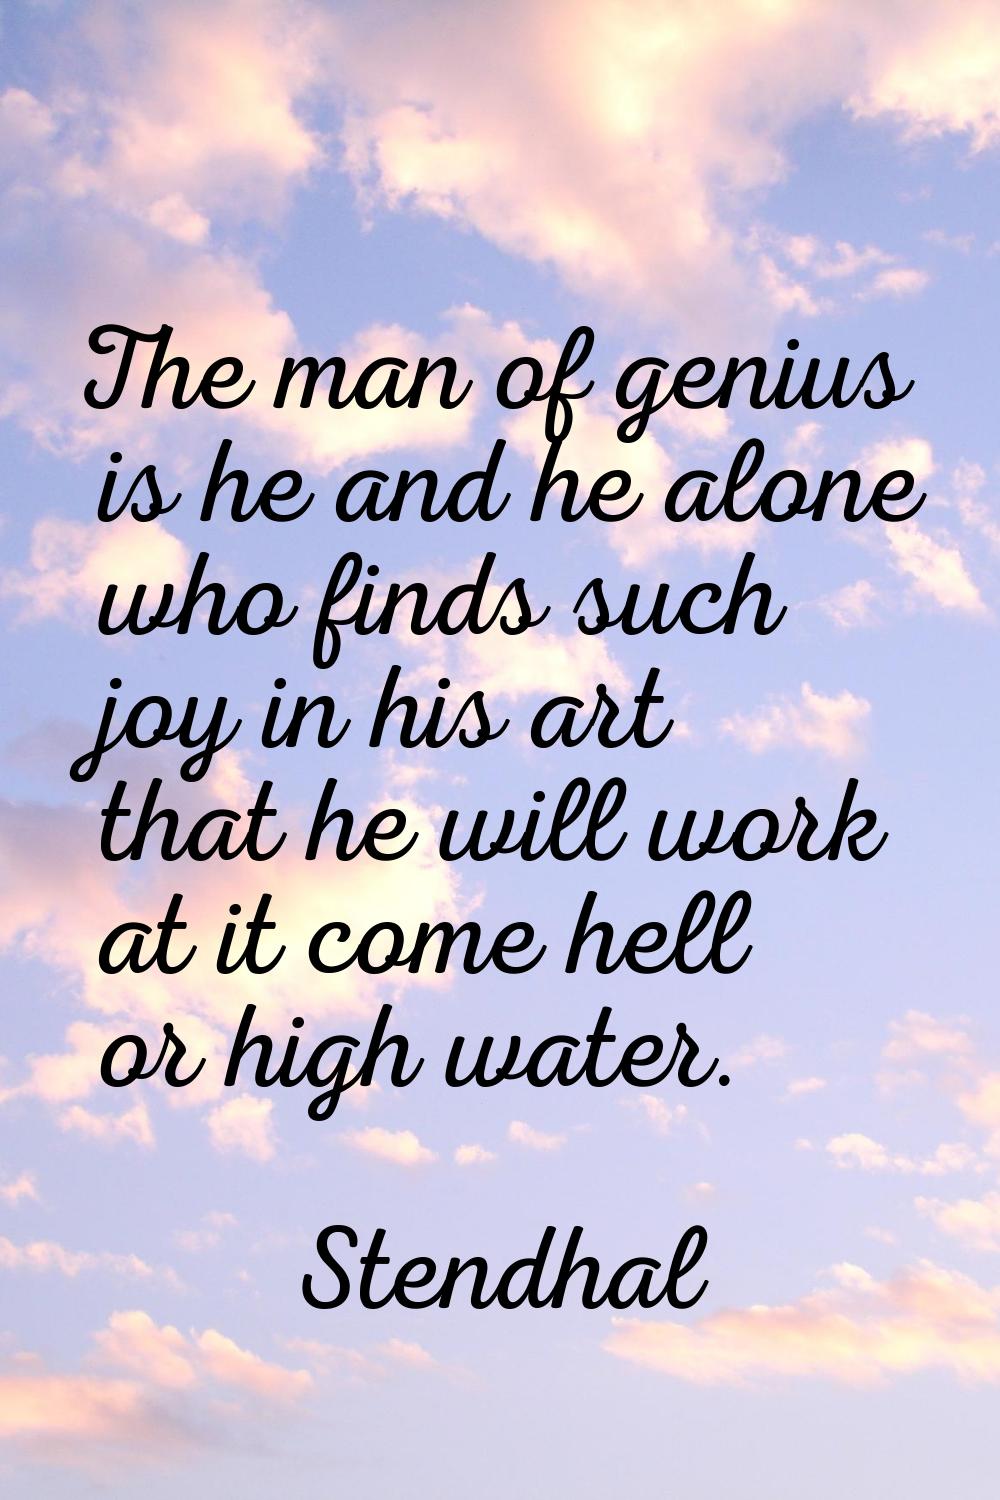 The man of genius is he and he alone who finds such joy in his art that he will work at it come hel